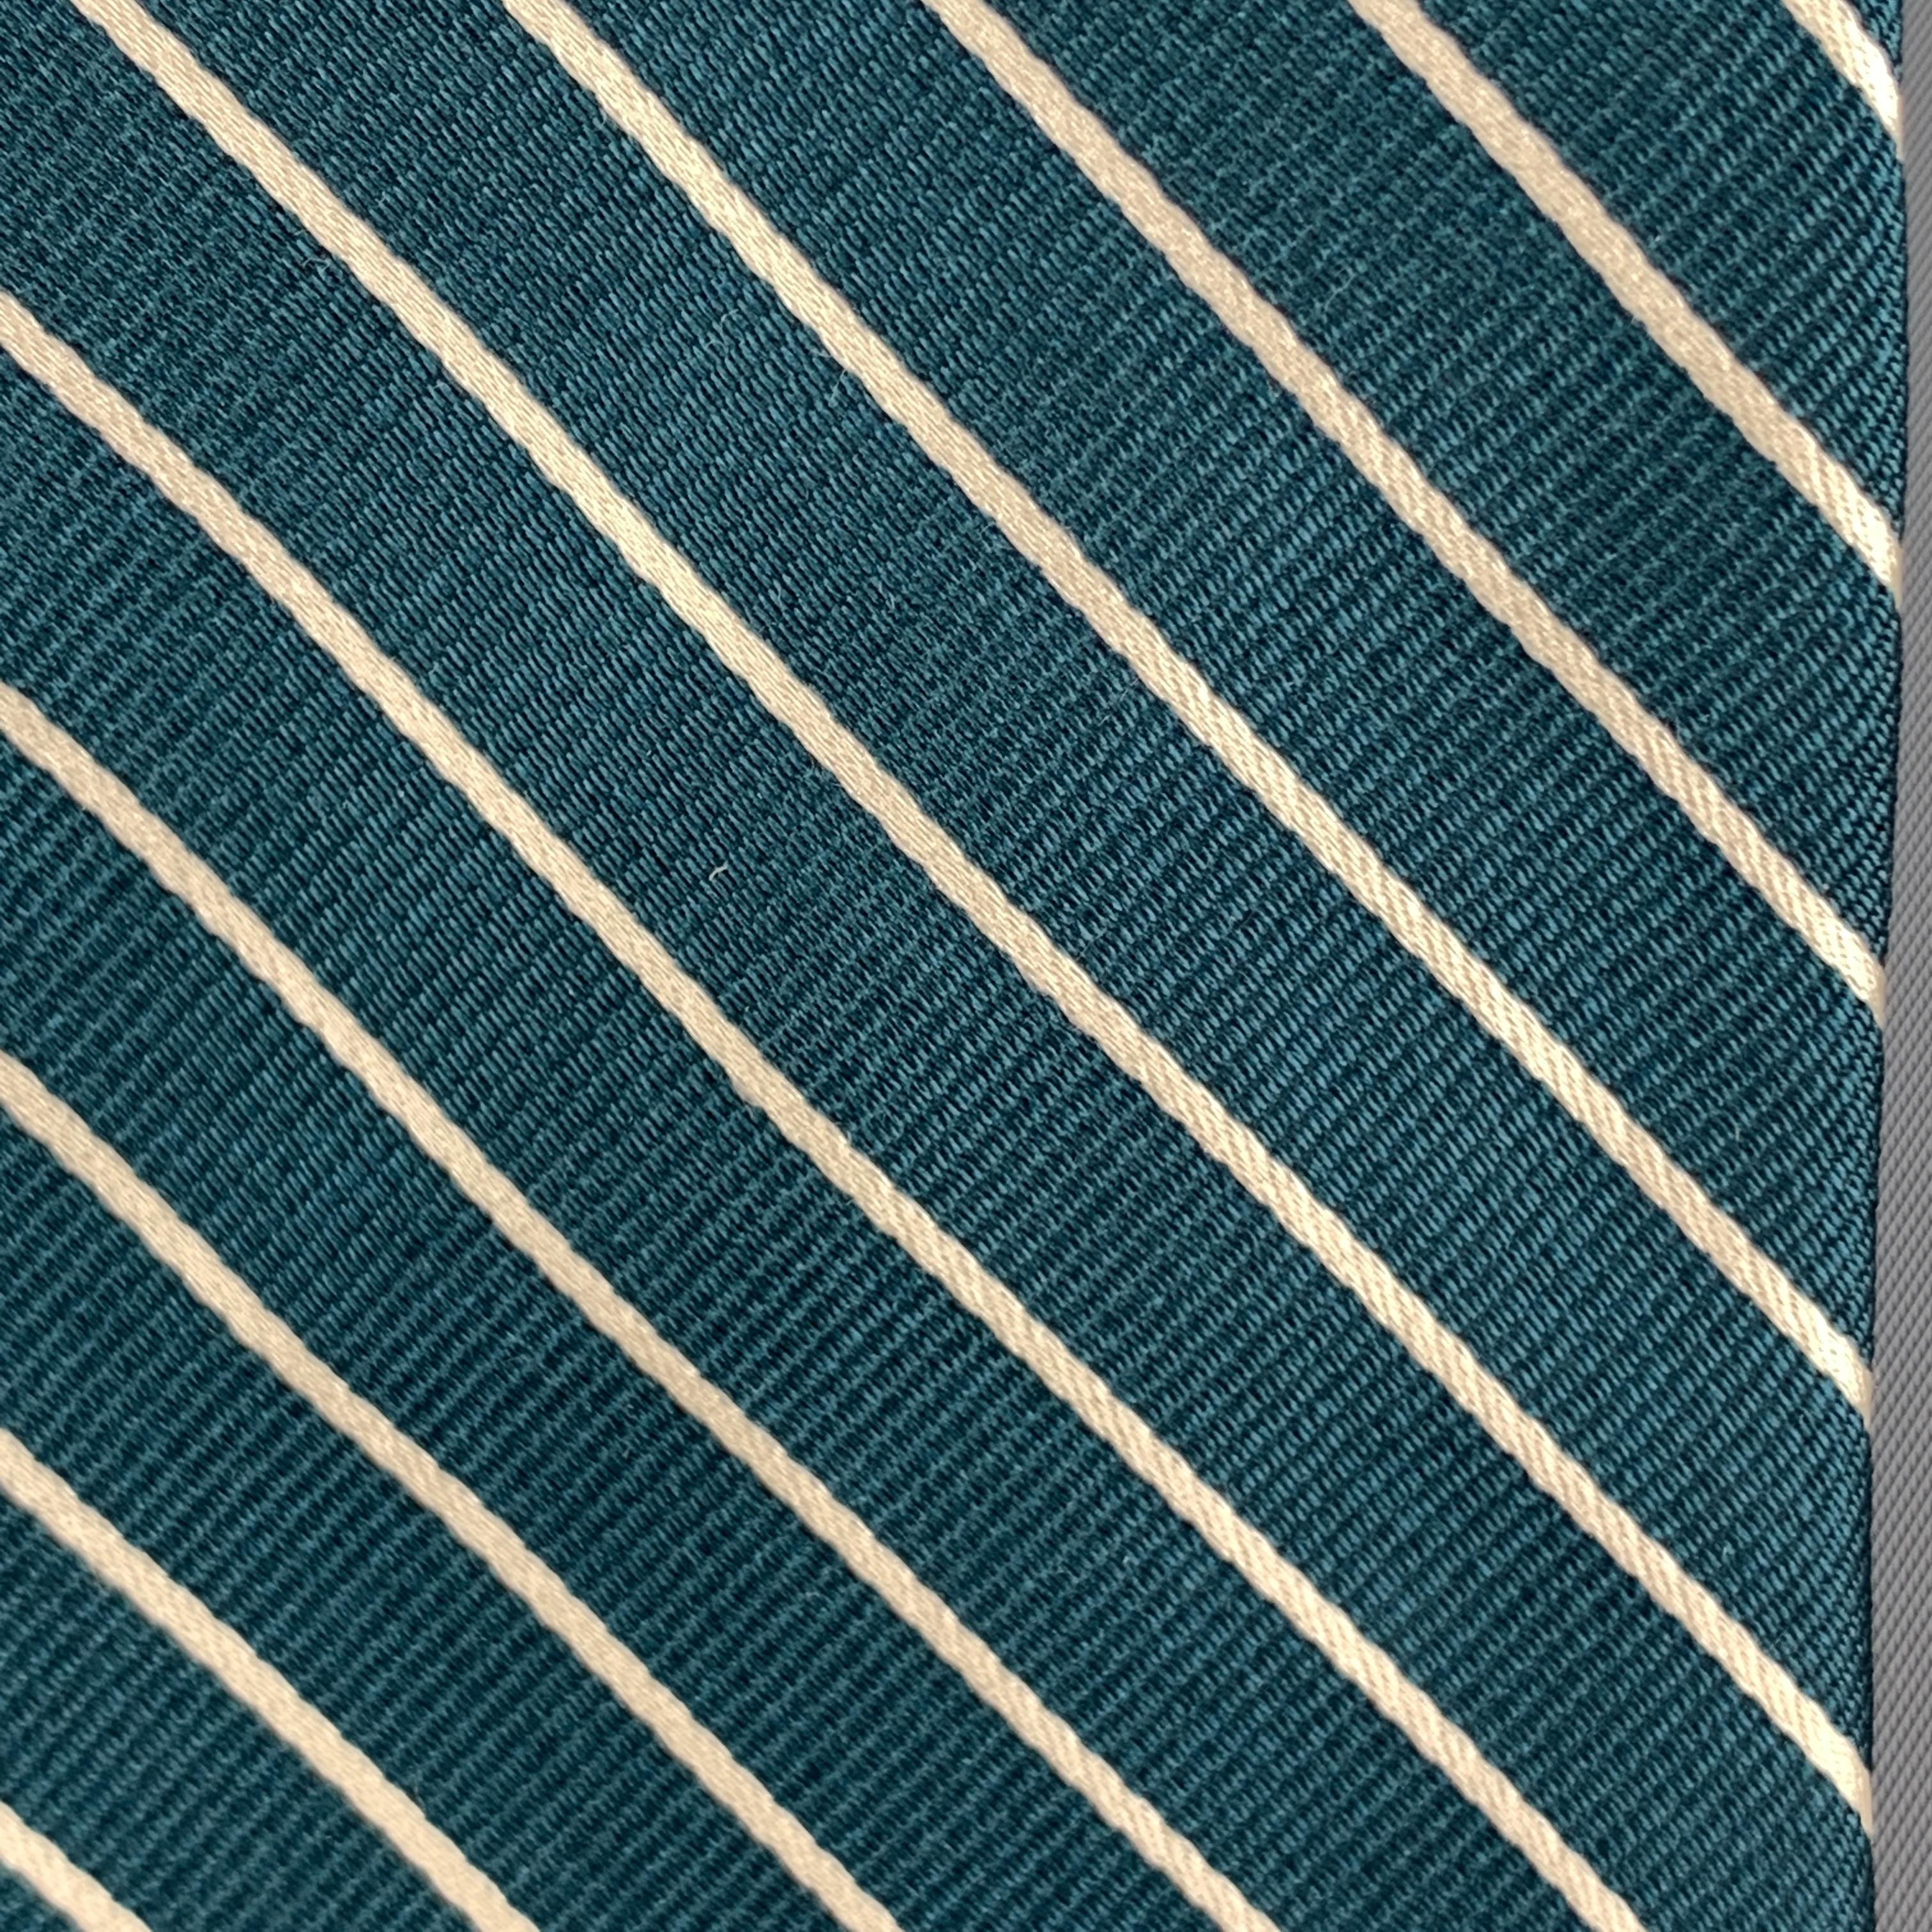 MICHAEL BASTIAN necktie comes in jewel tone green silk with all over diagonal striped print. Made in Italy.

Excellent Pre-Owned Condition.

Width: 3.25 in.